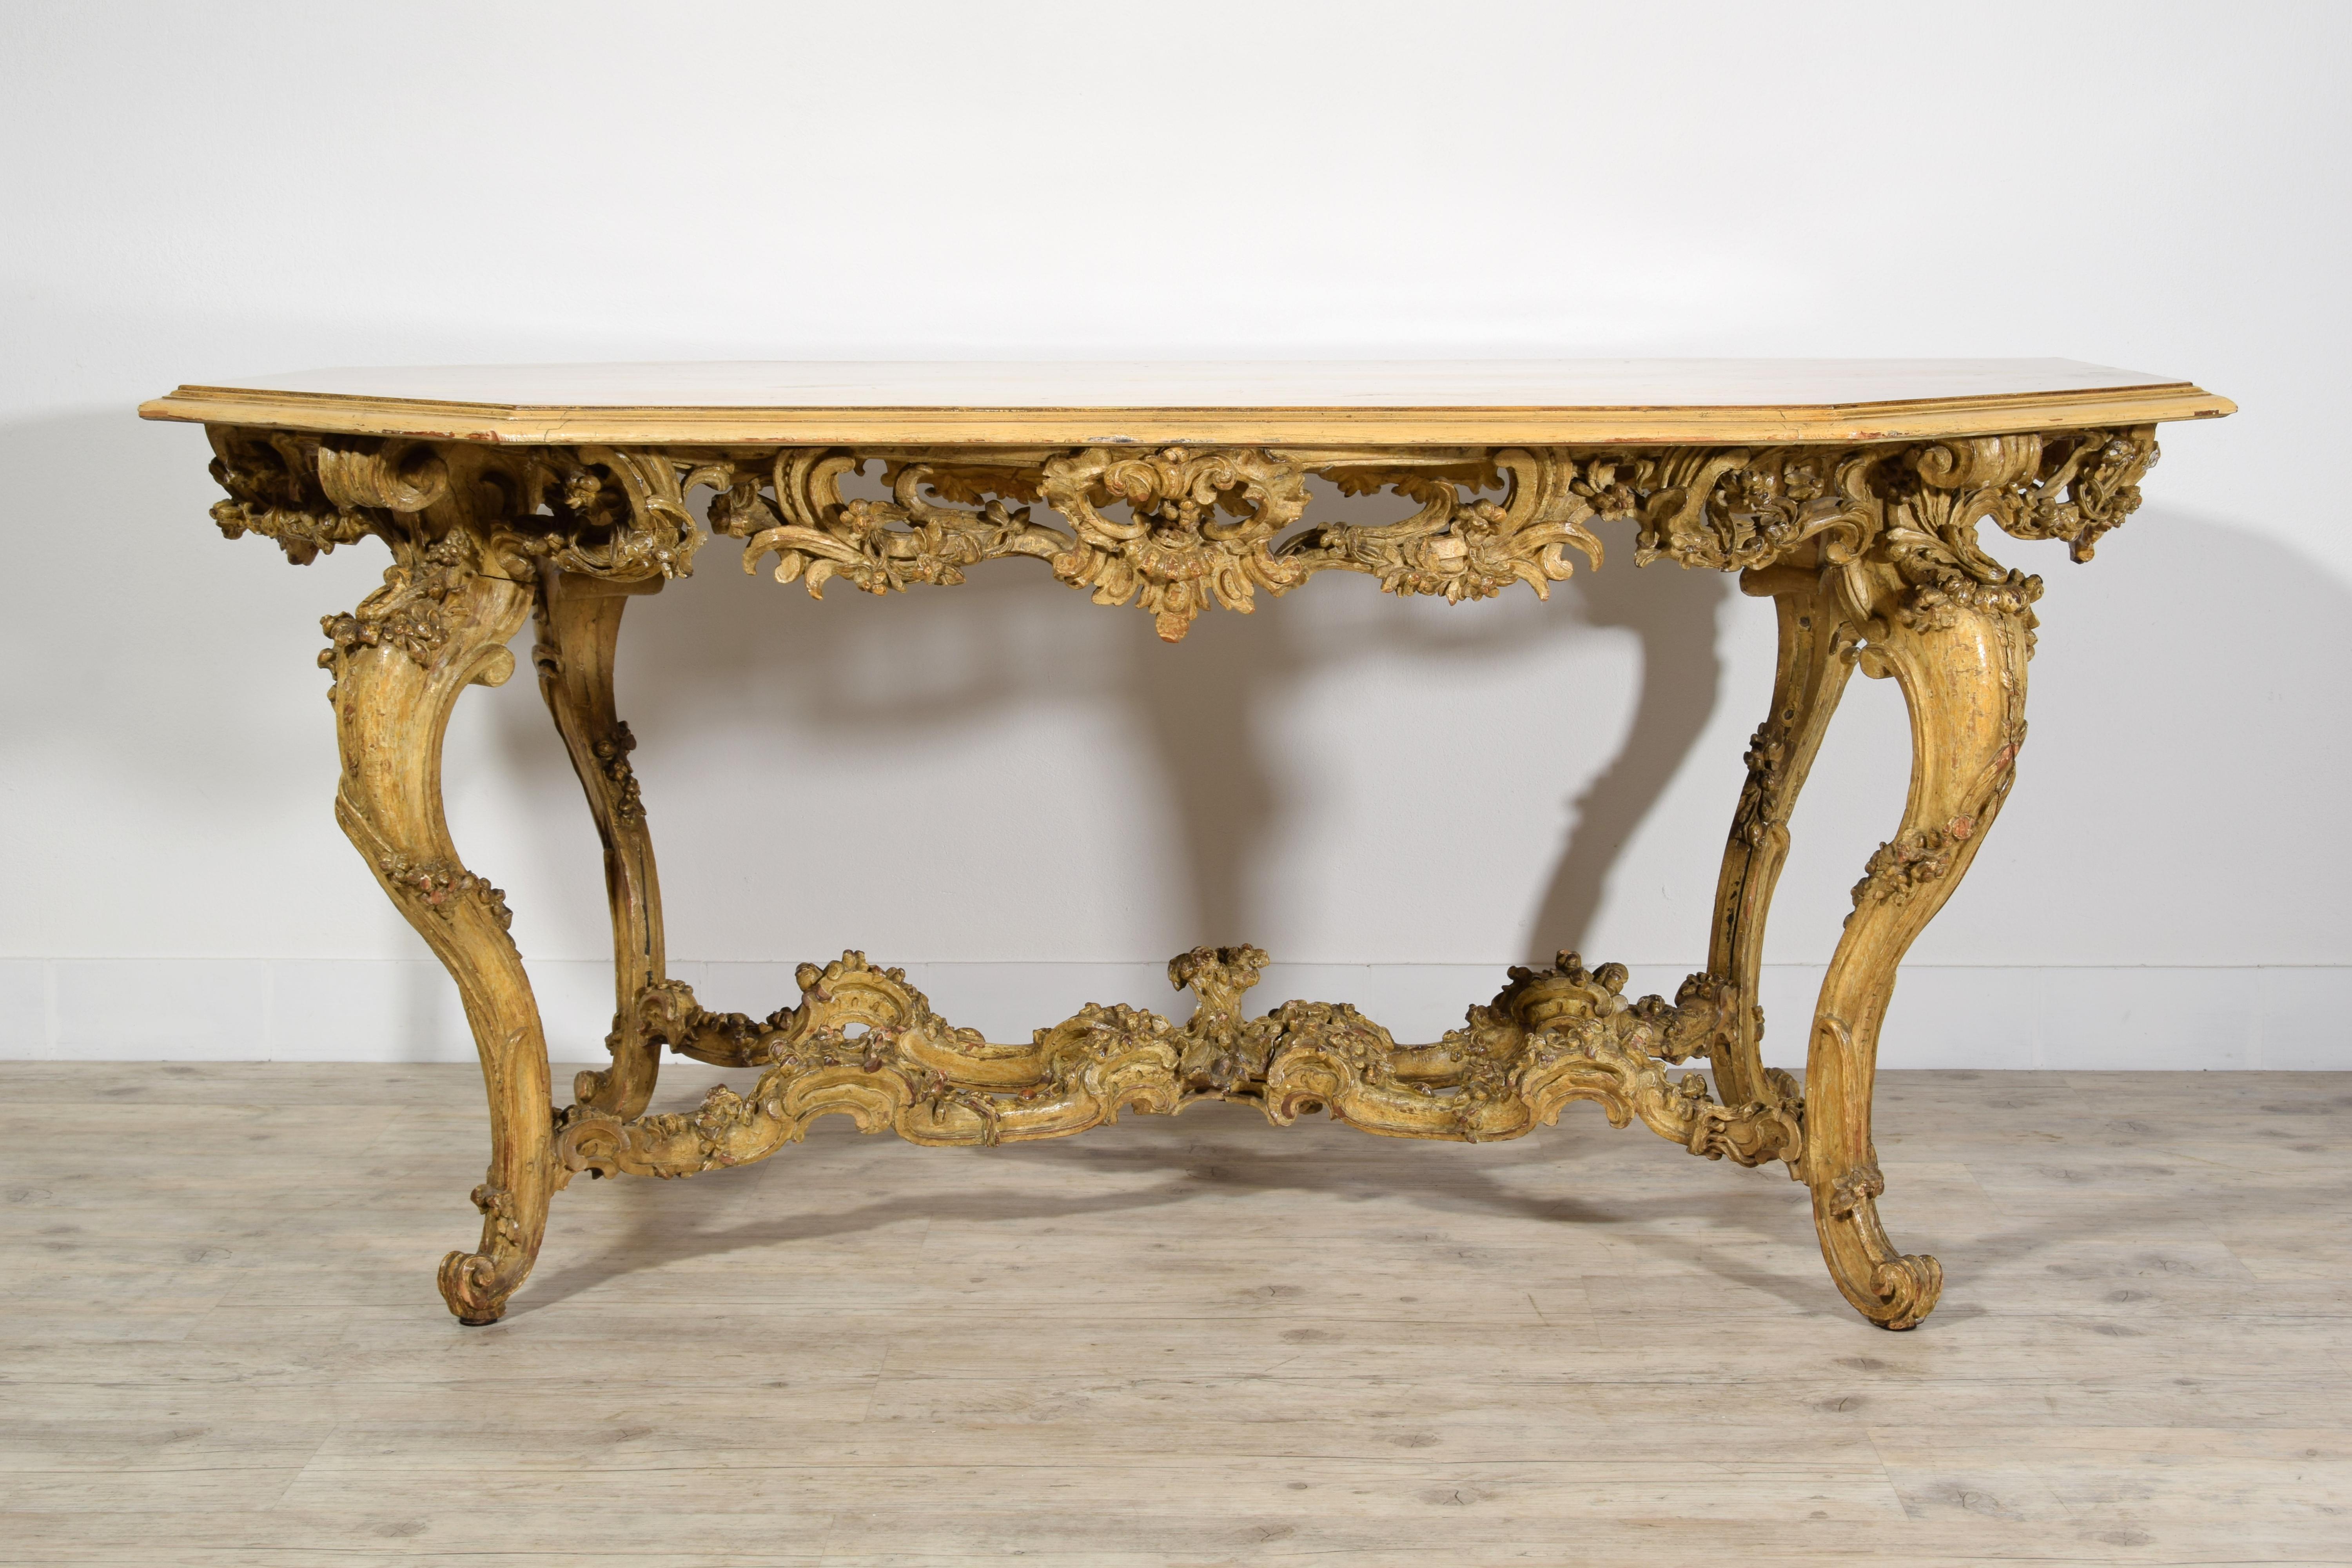 Italian Baroque Carved Gilt and Lacquered Wood Center Table, 18th Century For Sale 2